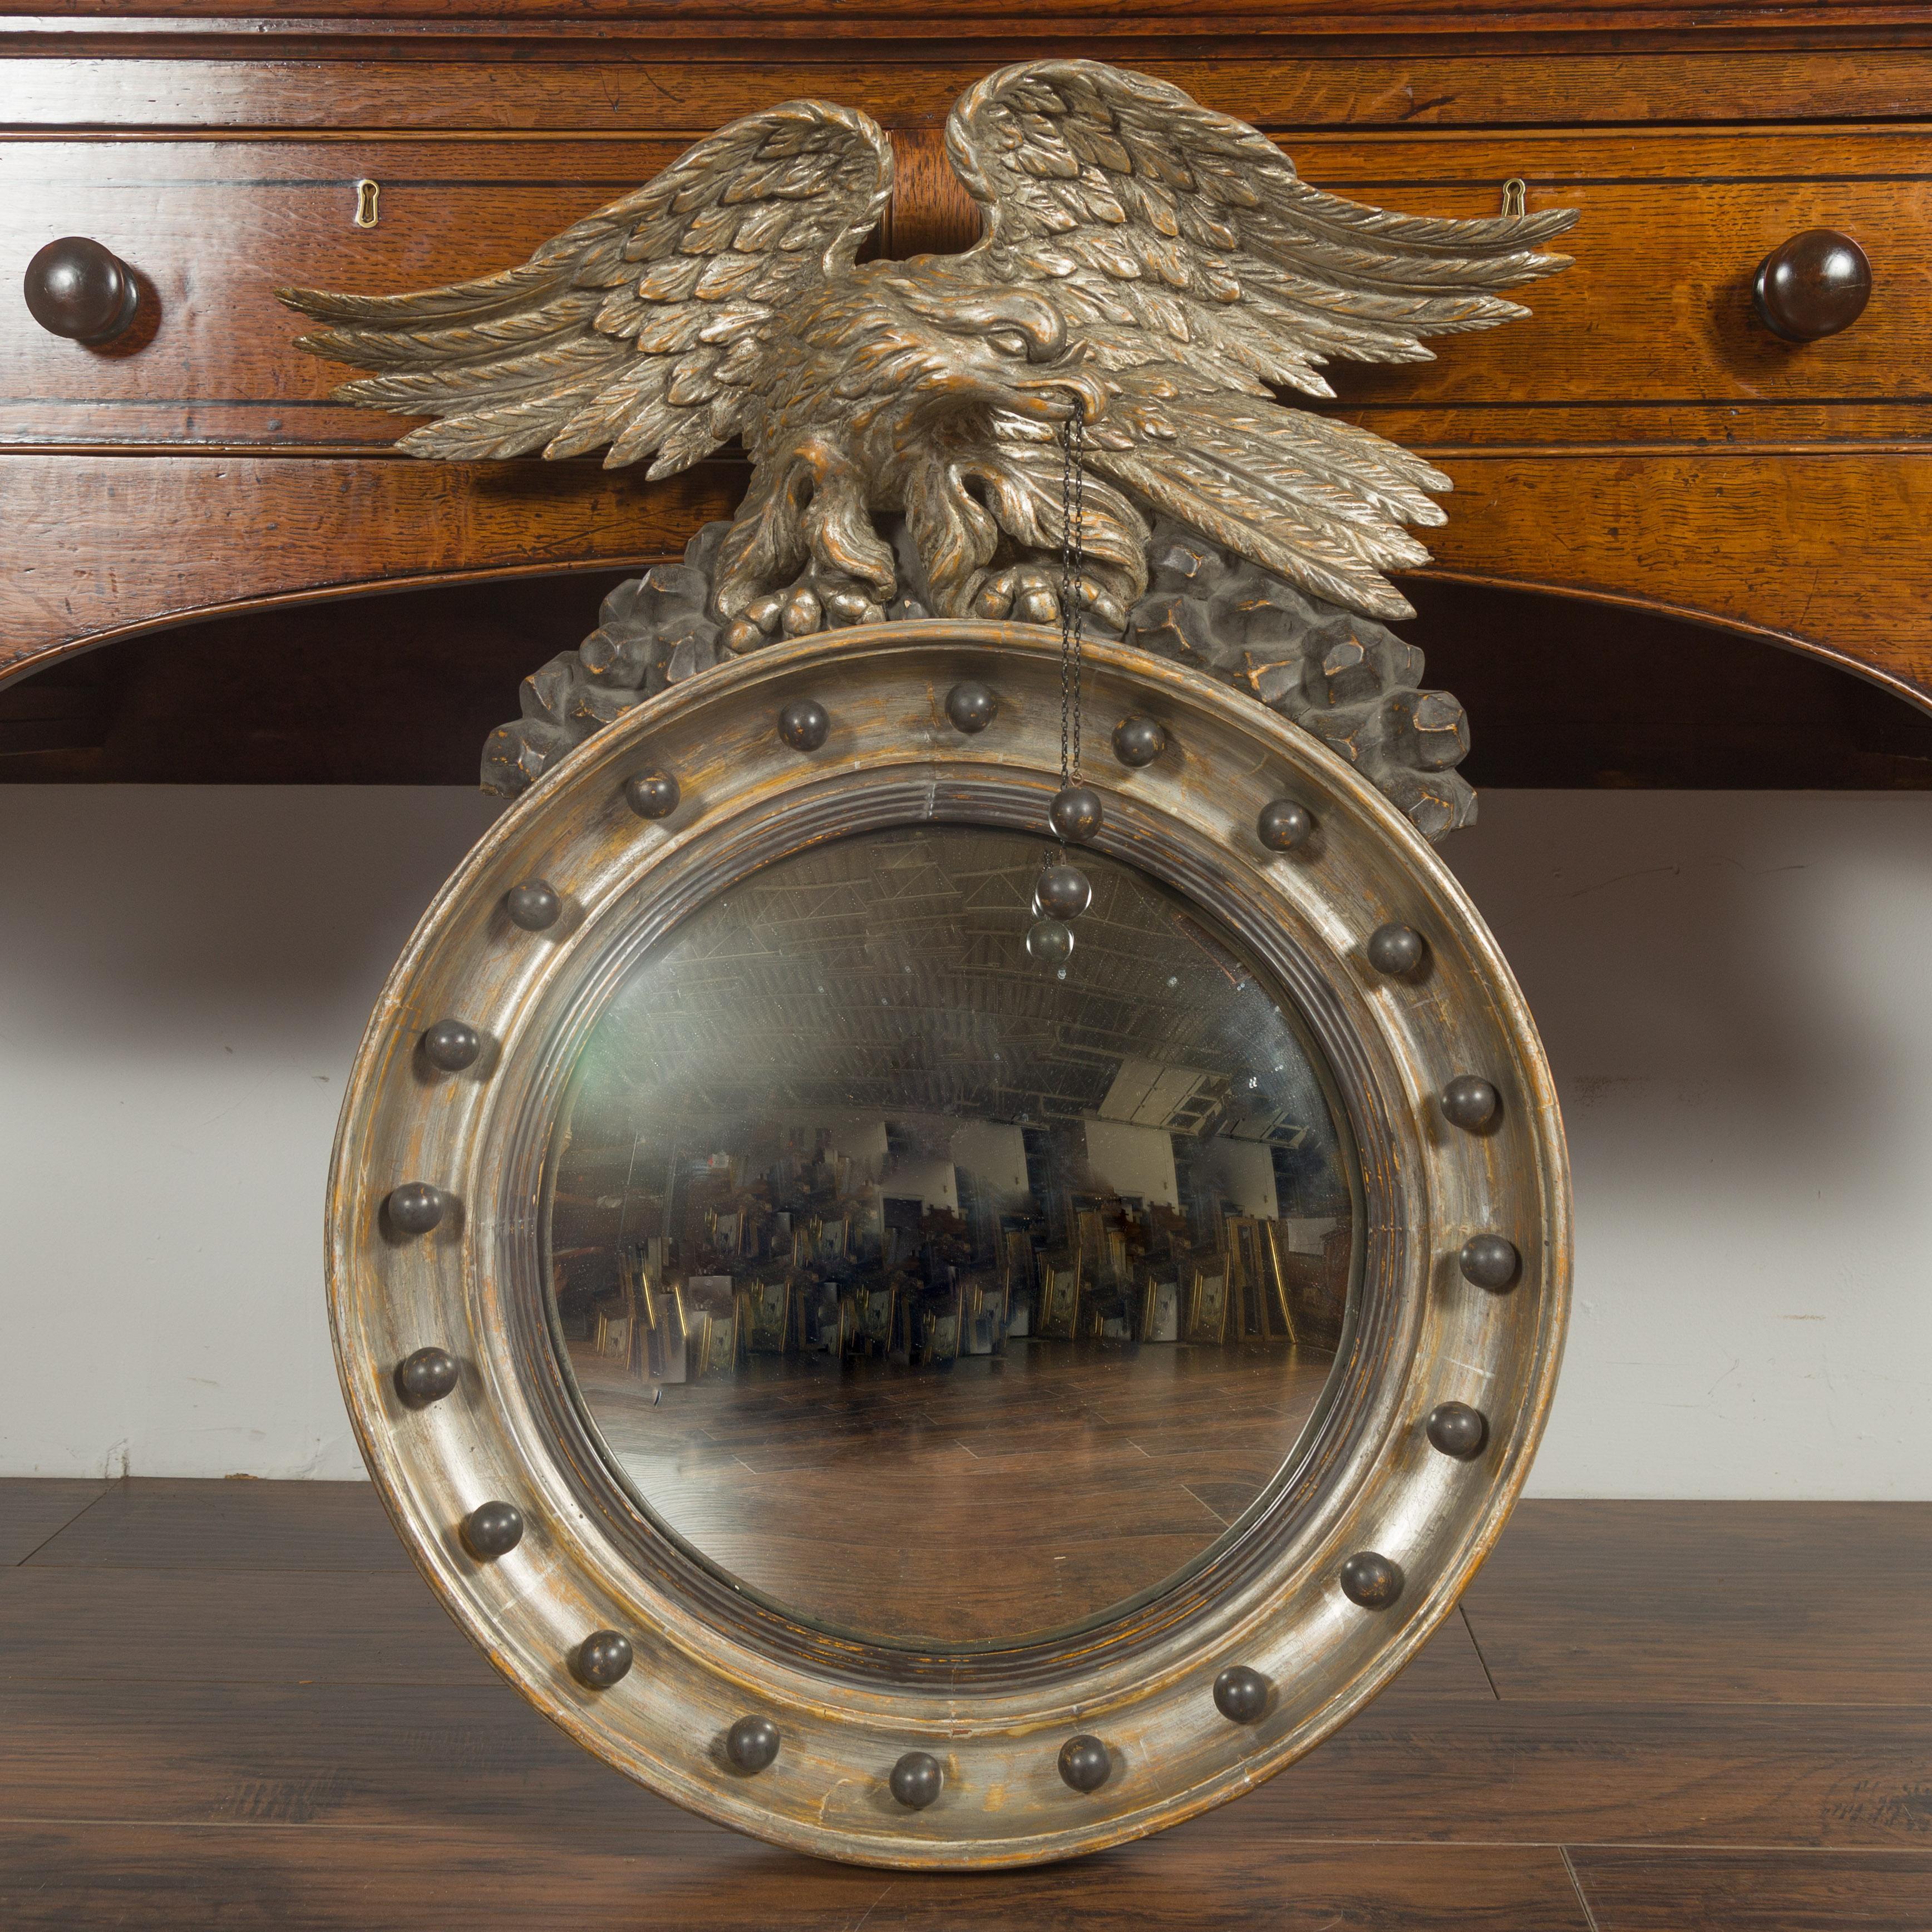 An English silver leaf convex girandole bullseye mirror from the mid-19th century, with eagle motif. Created in England during the third quarter of the 19th century, this silver leaf girandole mirror attracts our attention with its majestic eagle